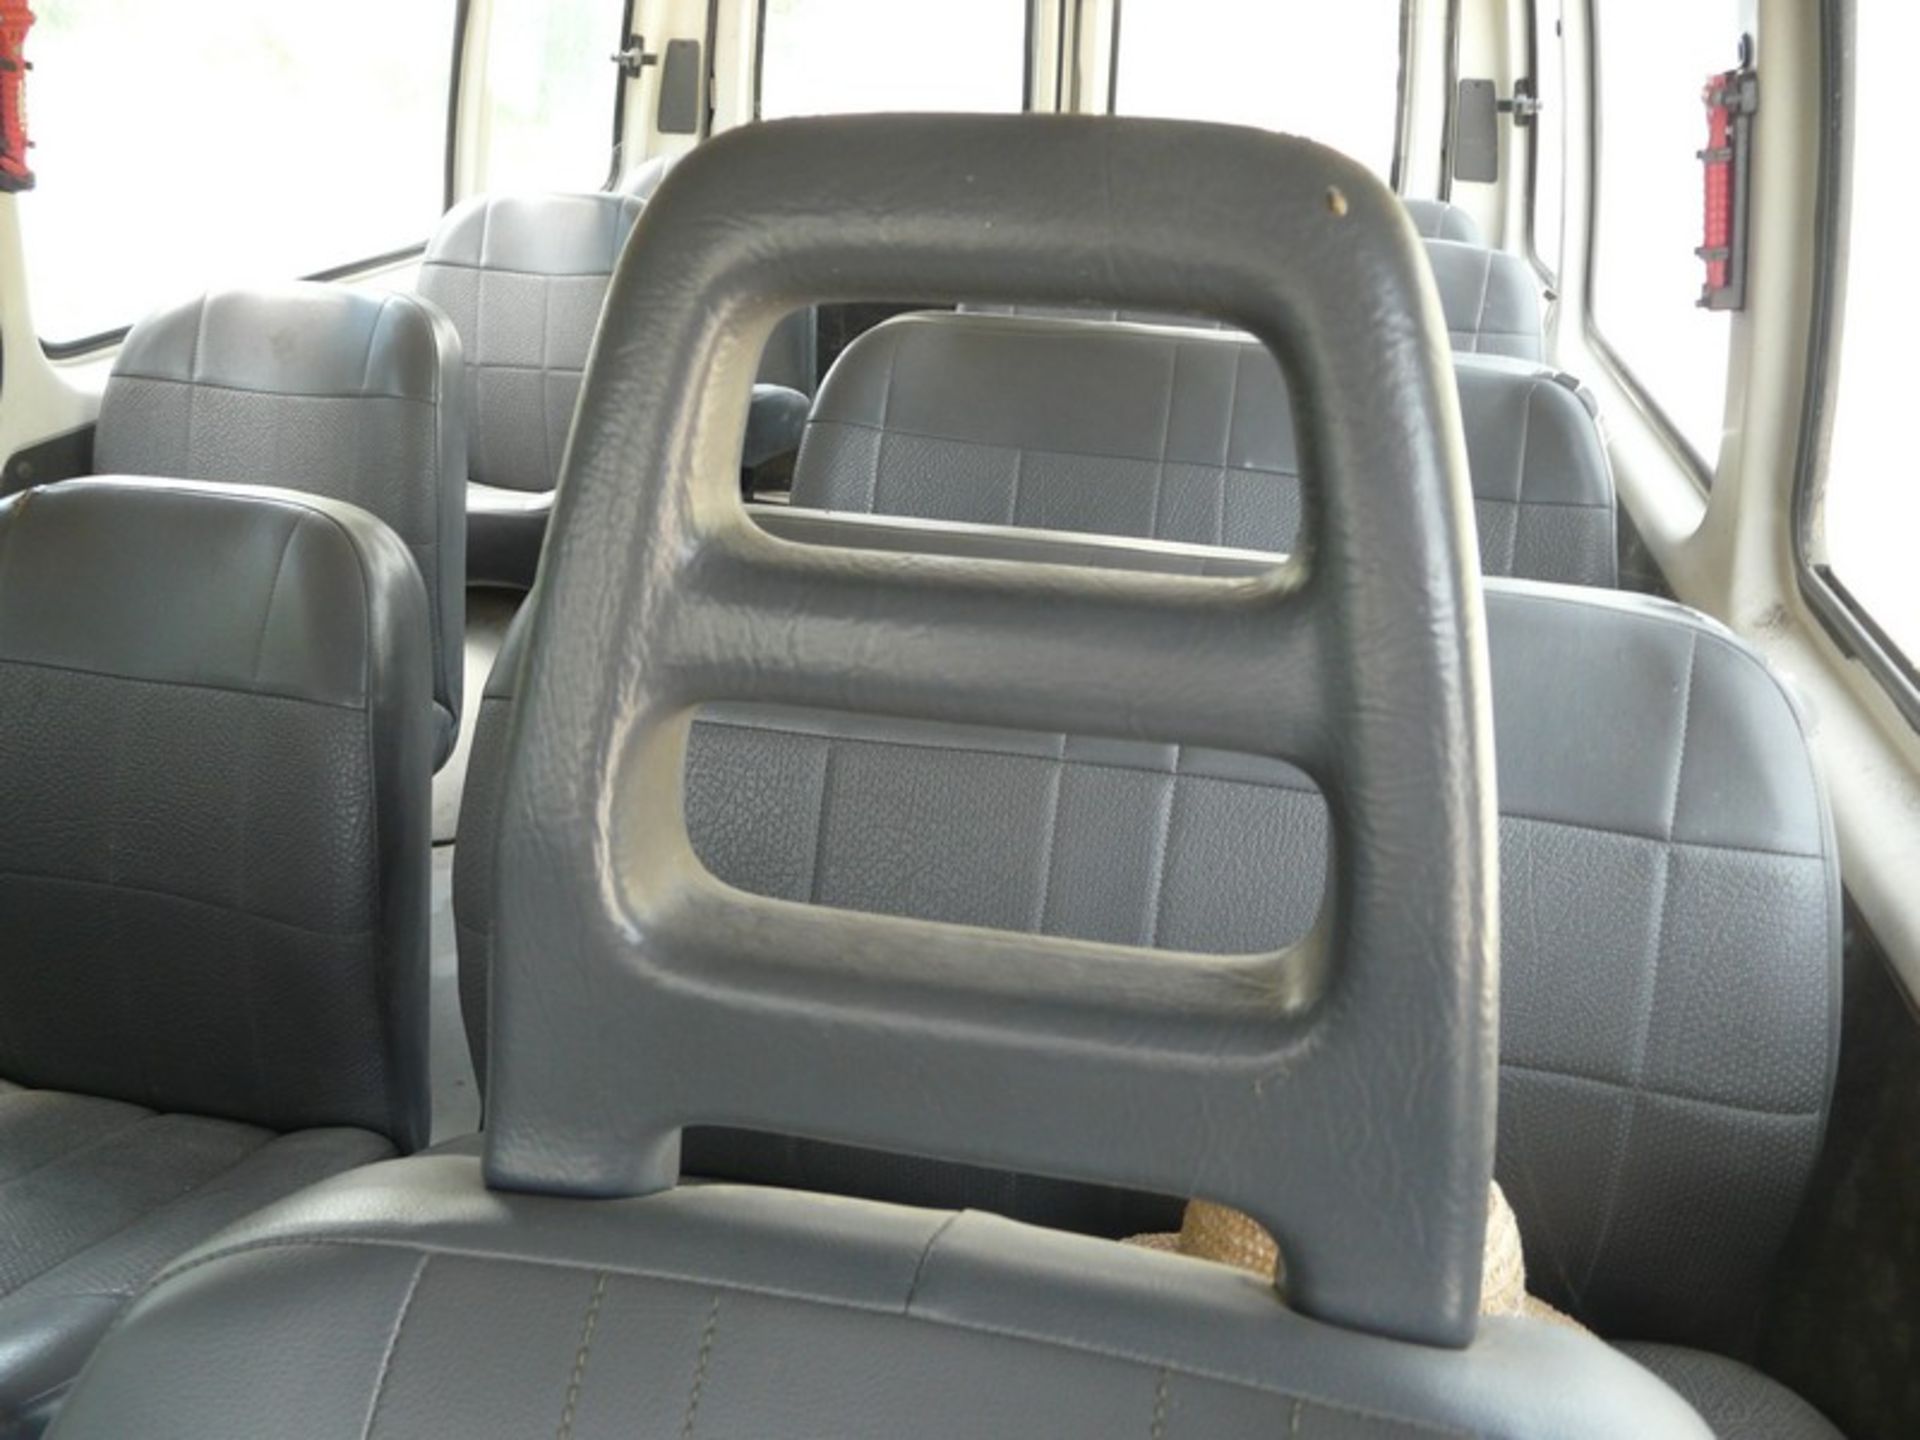 FORD TRANSIT, bus115, diesel, KM 212503, 14+1 seats, REG NBB 8161, Year: 1991 (Located in Greece - - Image 7 of 10